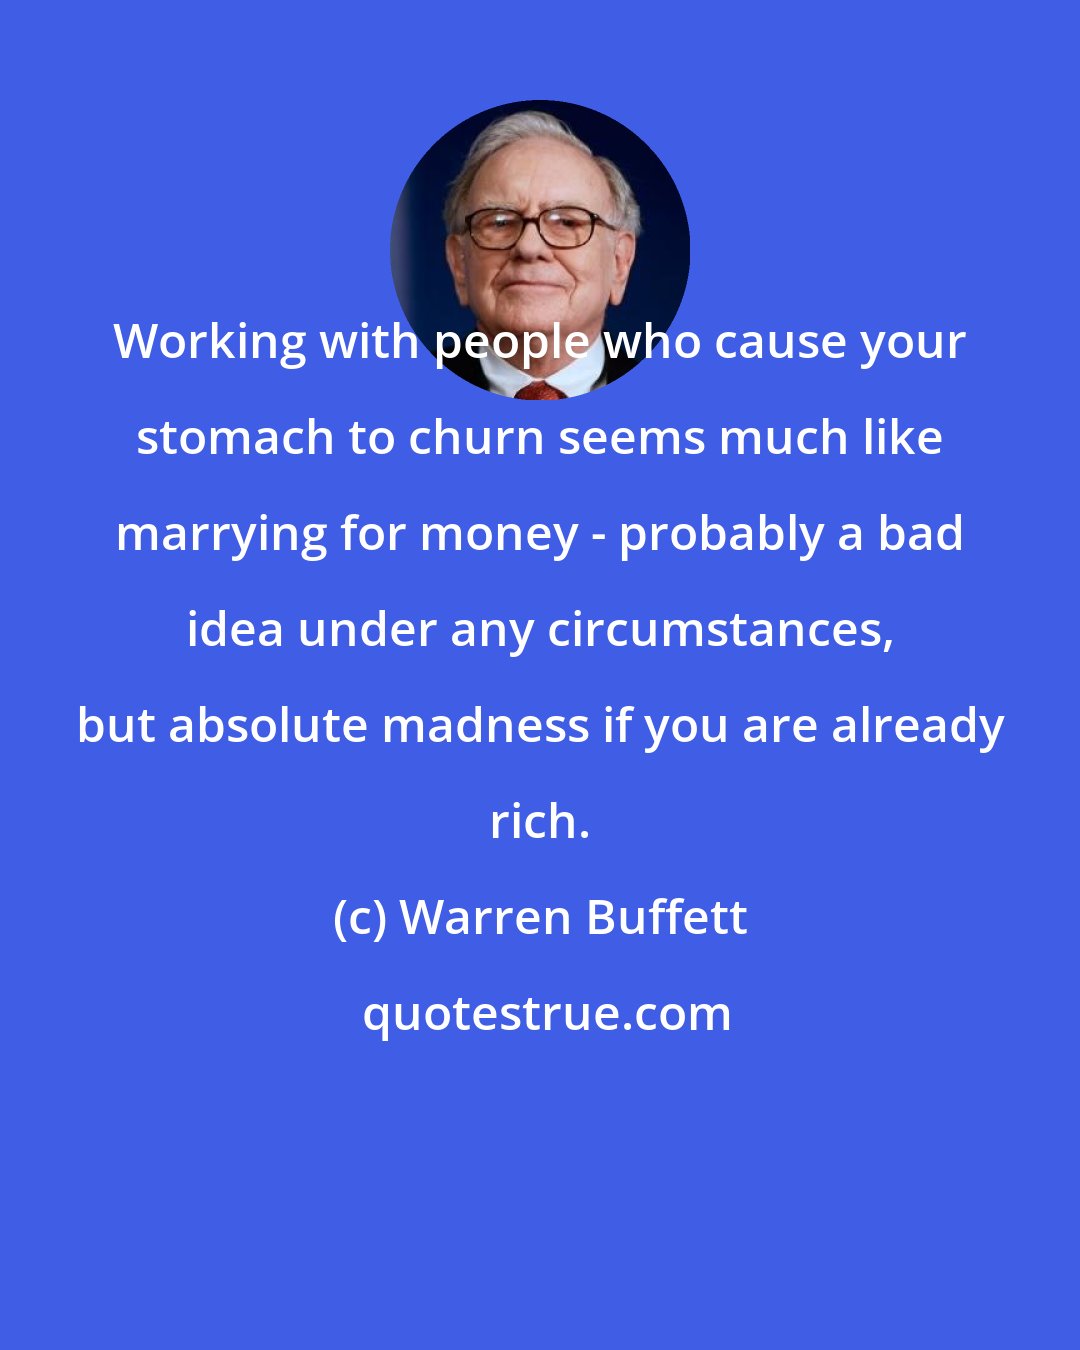 Warren Buffett: Working with people who cause your stomach to churn seems much like marrying for money - probably a bad idea under any circumstances, but absolute madness if you are already rich.